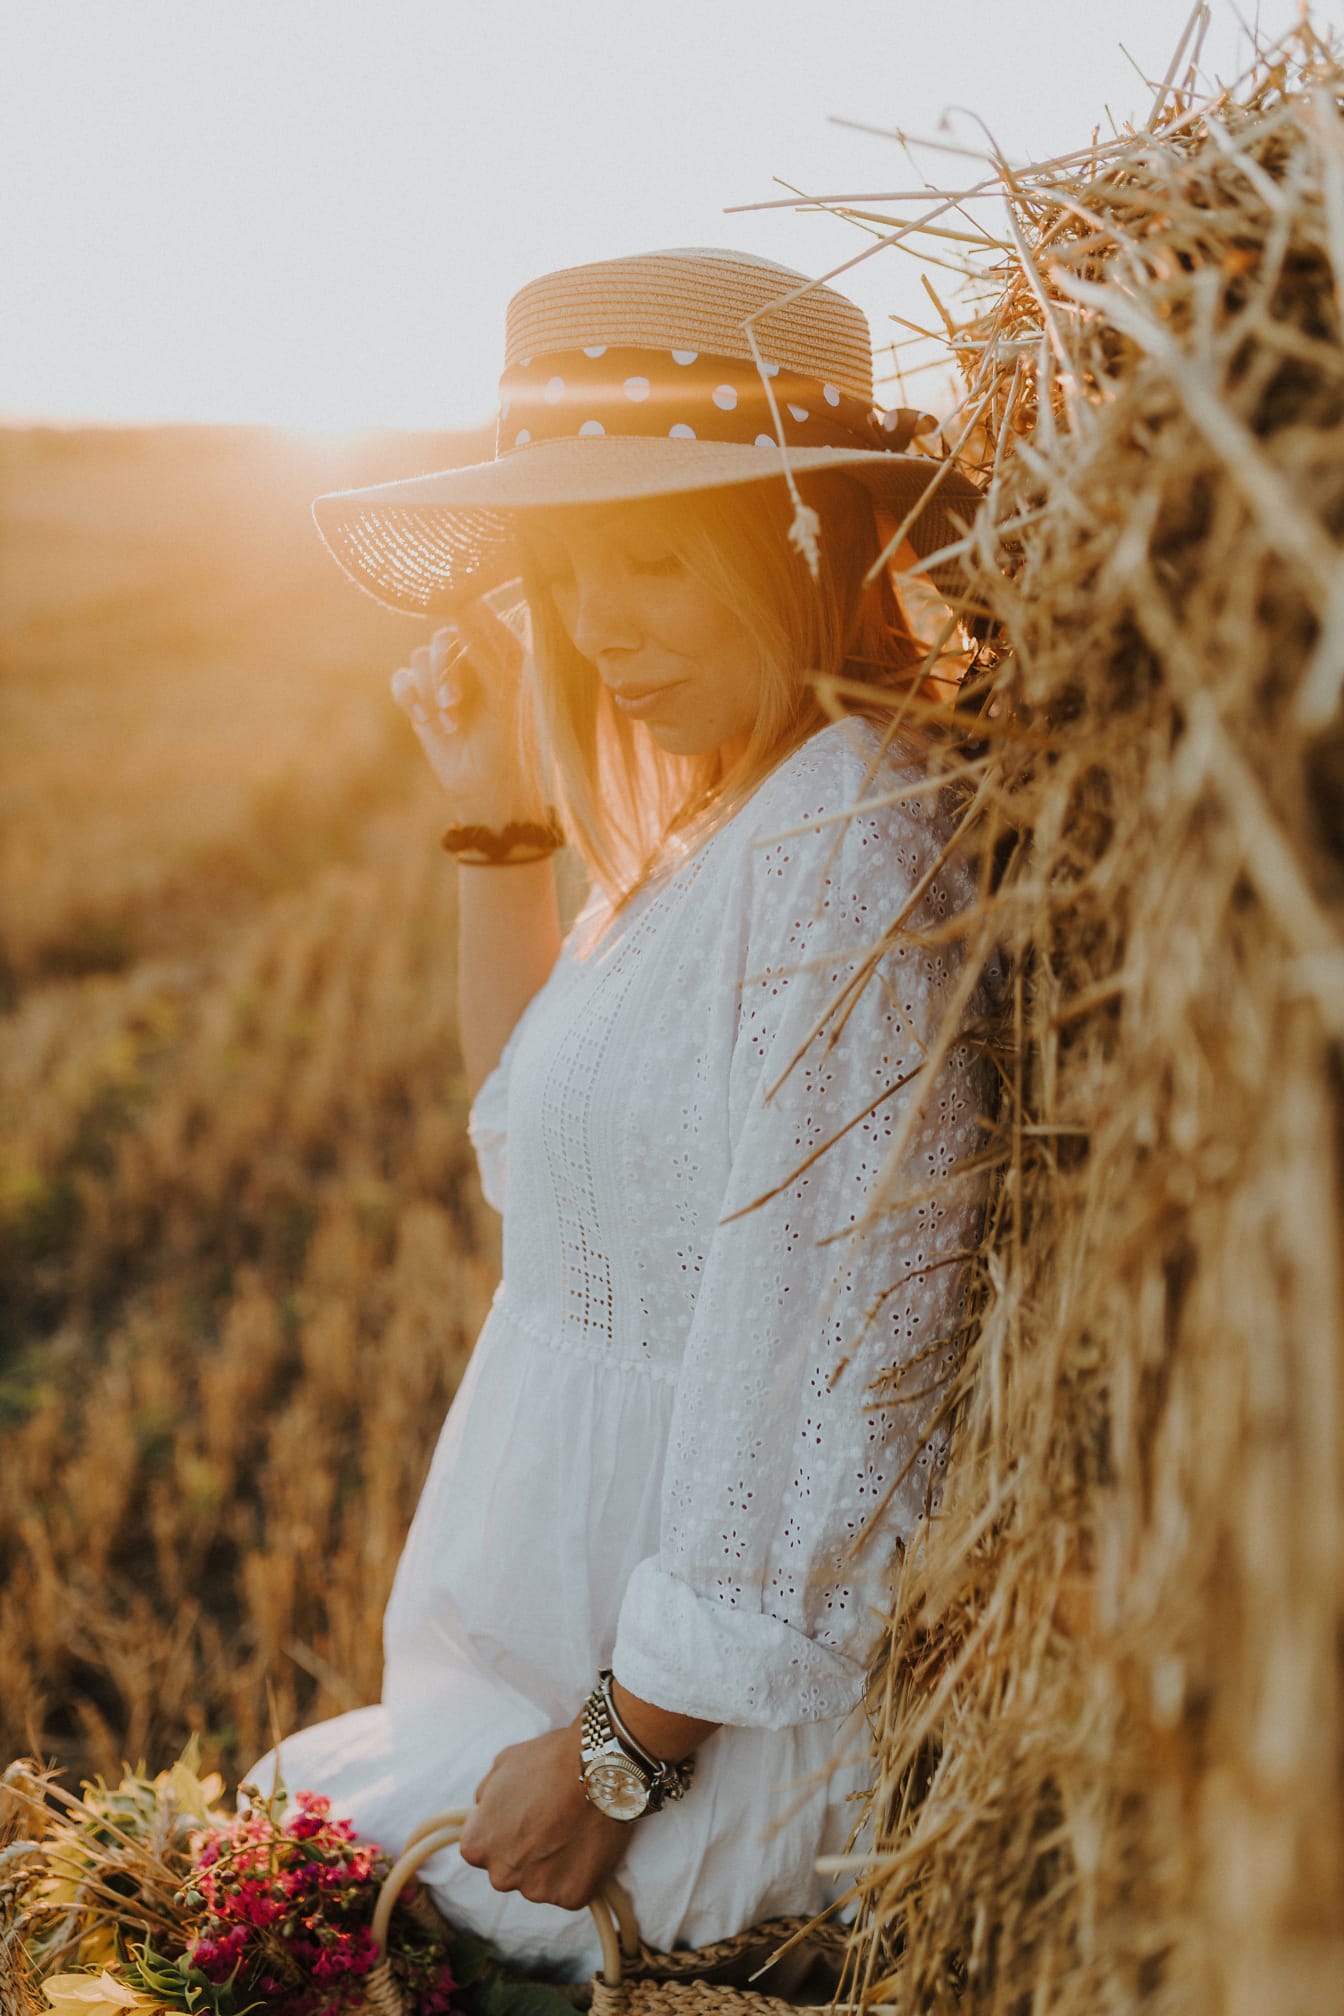 Pretty young woman with hat by haystack in wheat field